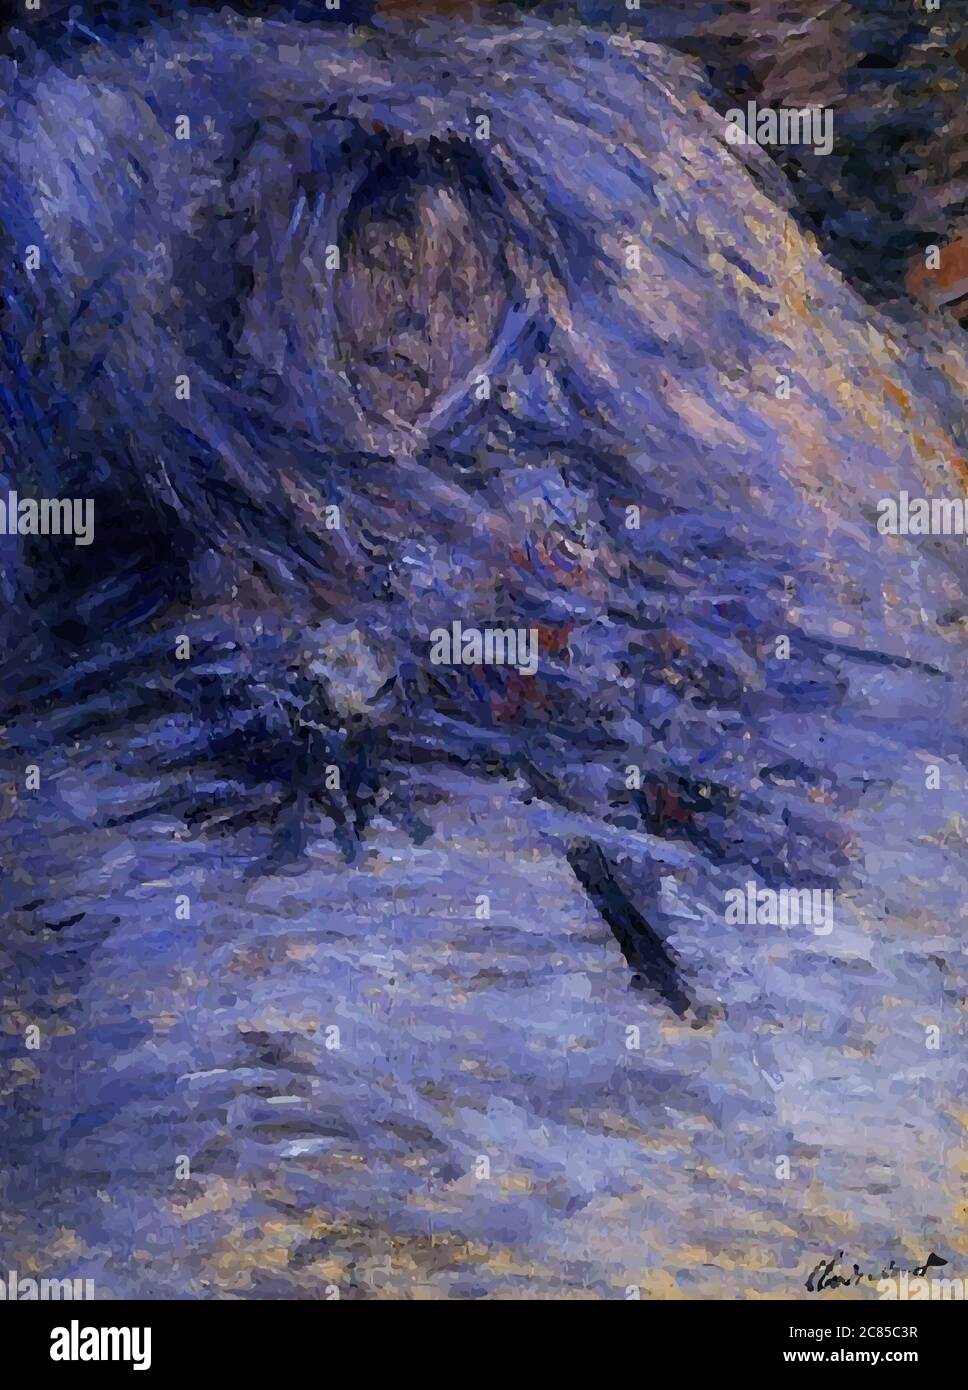 My digital altered The Camille in Her Deathbed by Claude Monet 1879, Museum Orsay, Paris Stock Photo